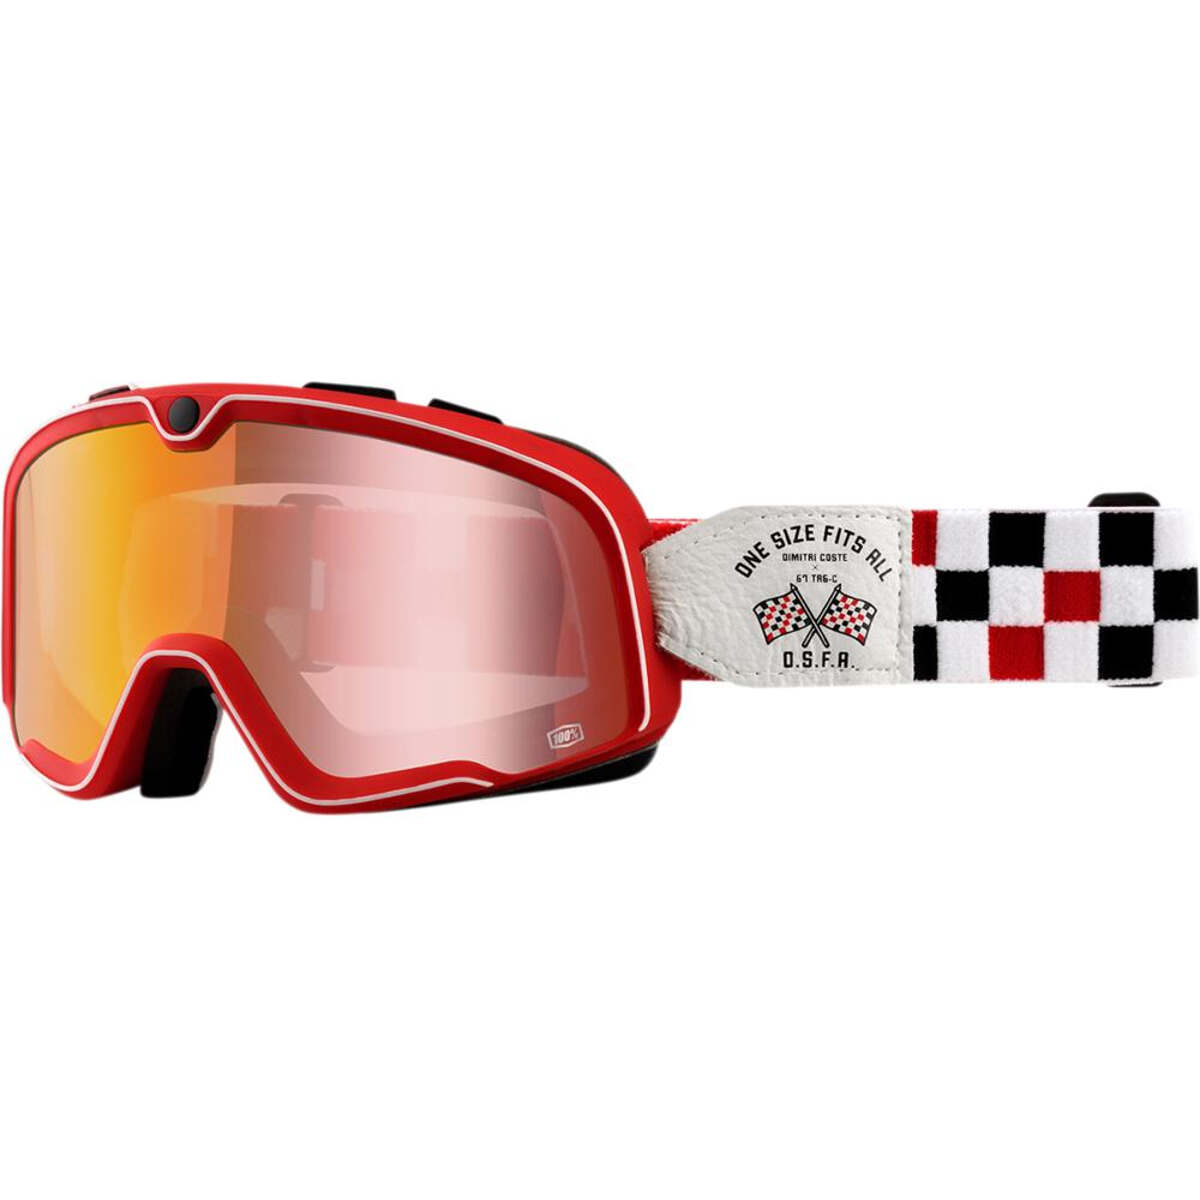 100% Goggle The Barstow O.S.F.A. - Mirror Red Anti-Fog